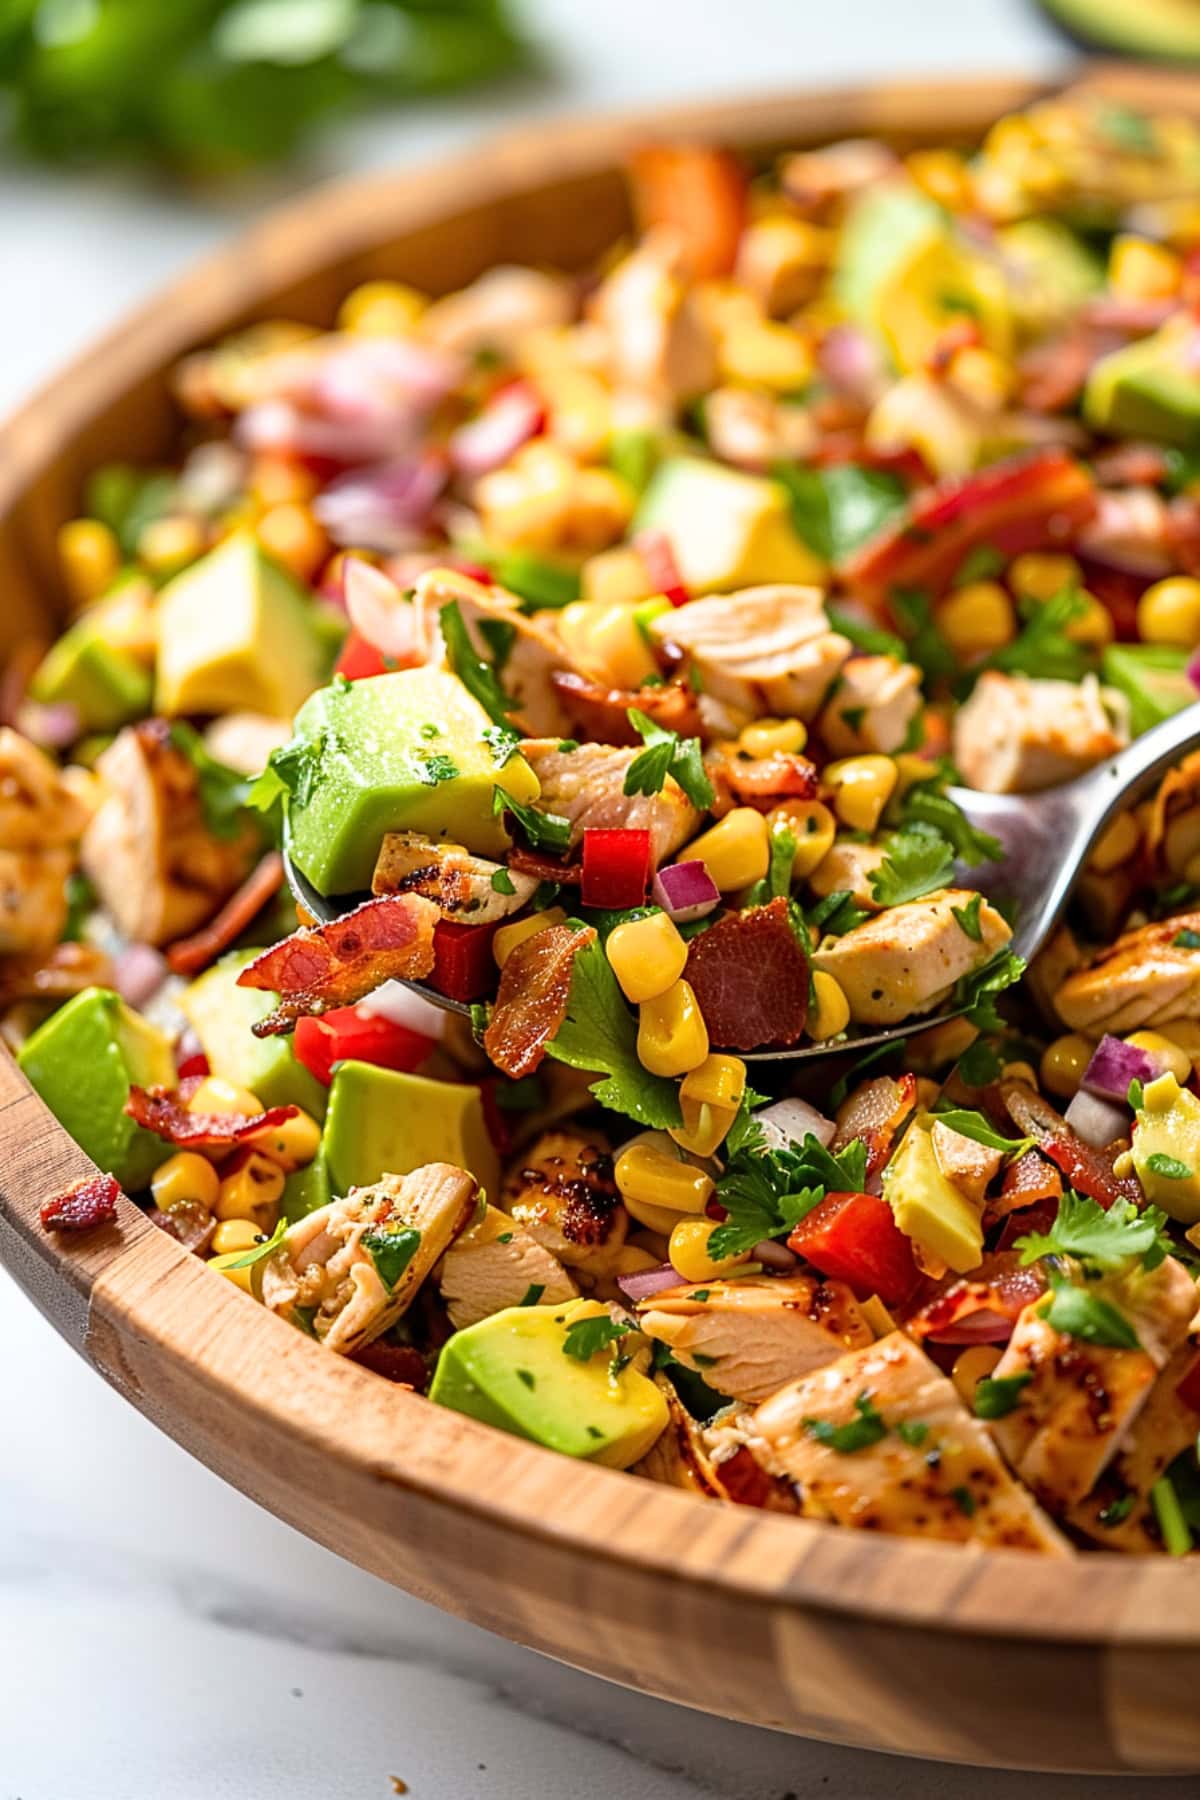 Spoon scooping avocado salad with with mix of bacon, cooked and crumbled, shredded chicken breasts, small square slice ripe avocados, corn kernels, finely chopped small red onion, fresh cilantro chopped with olive oil and lime juice dressing served in a wooden bowl.